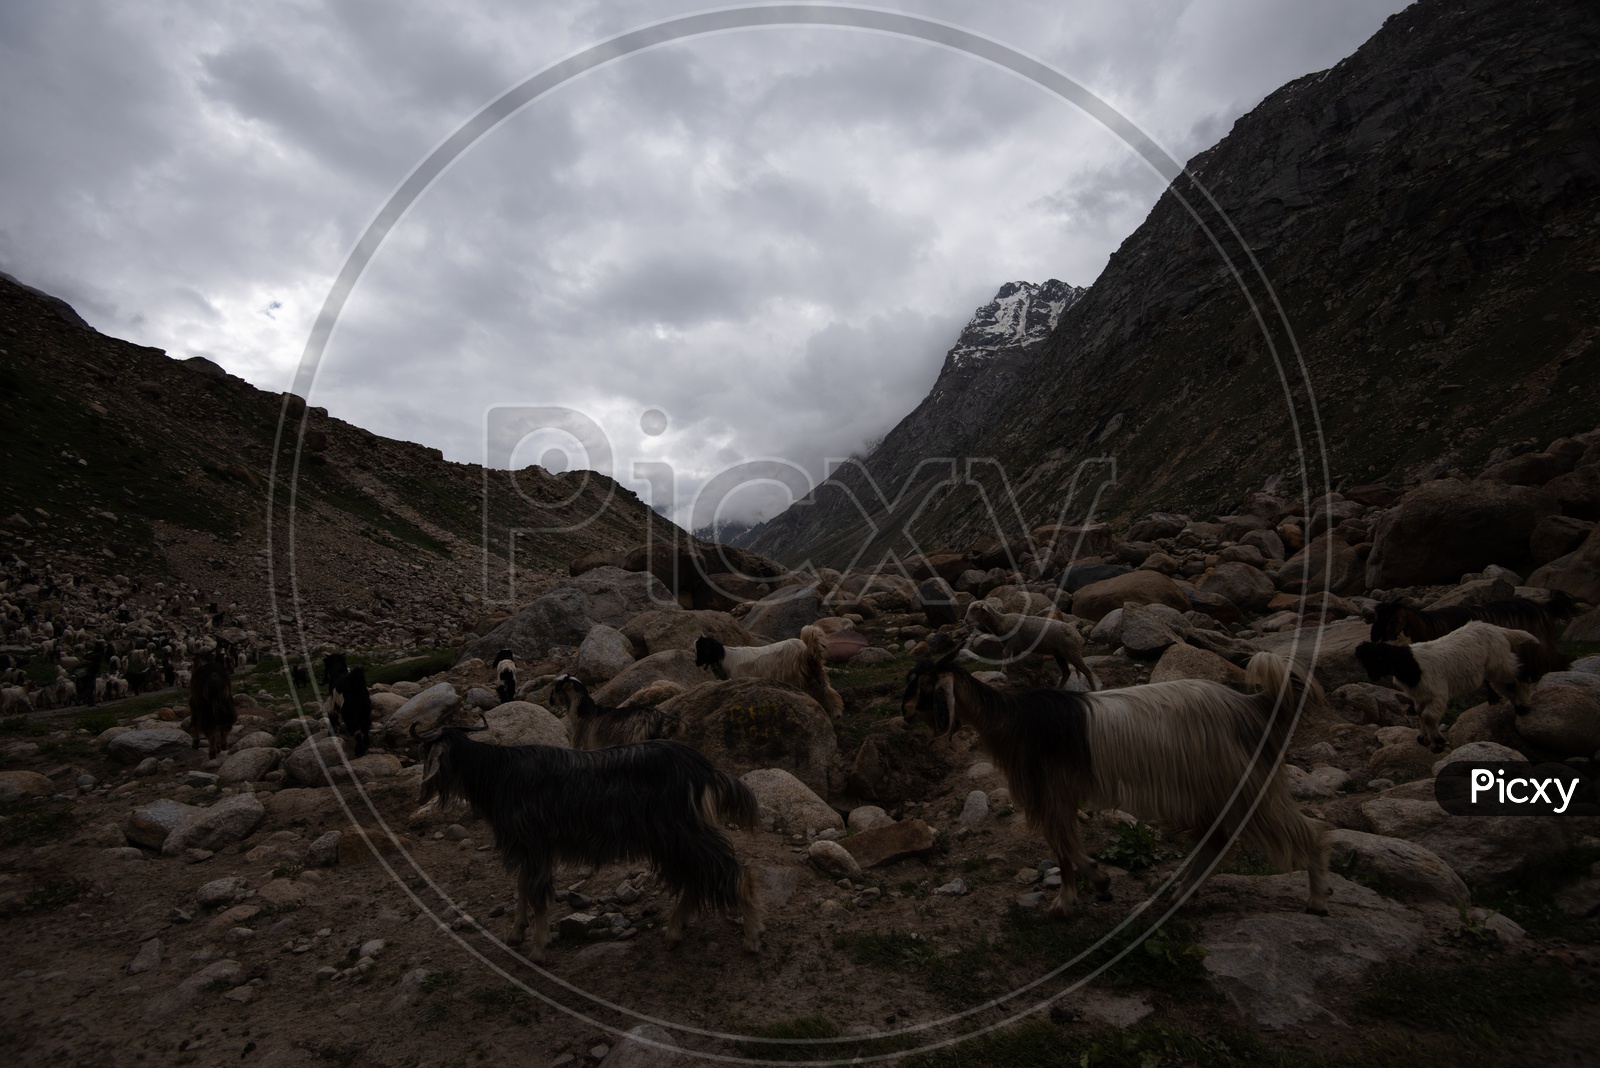 Goats / Cattle in the River valleys Of Leh / Ladakh